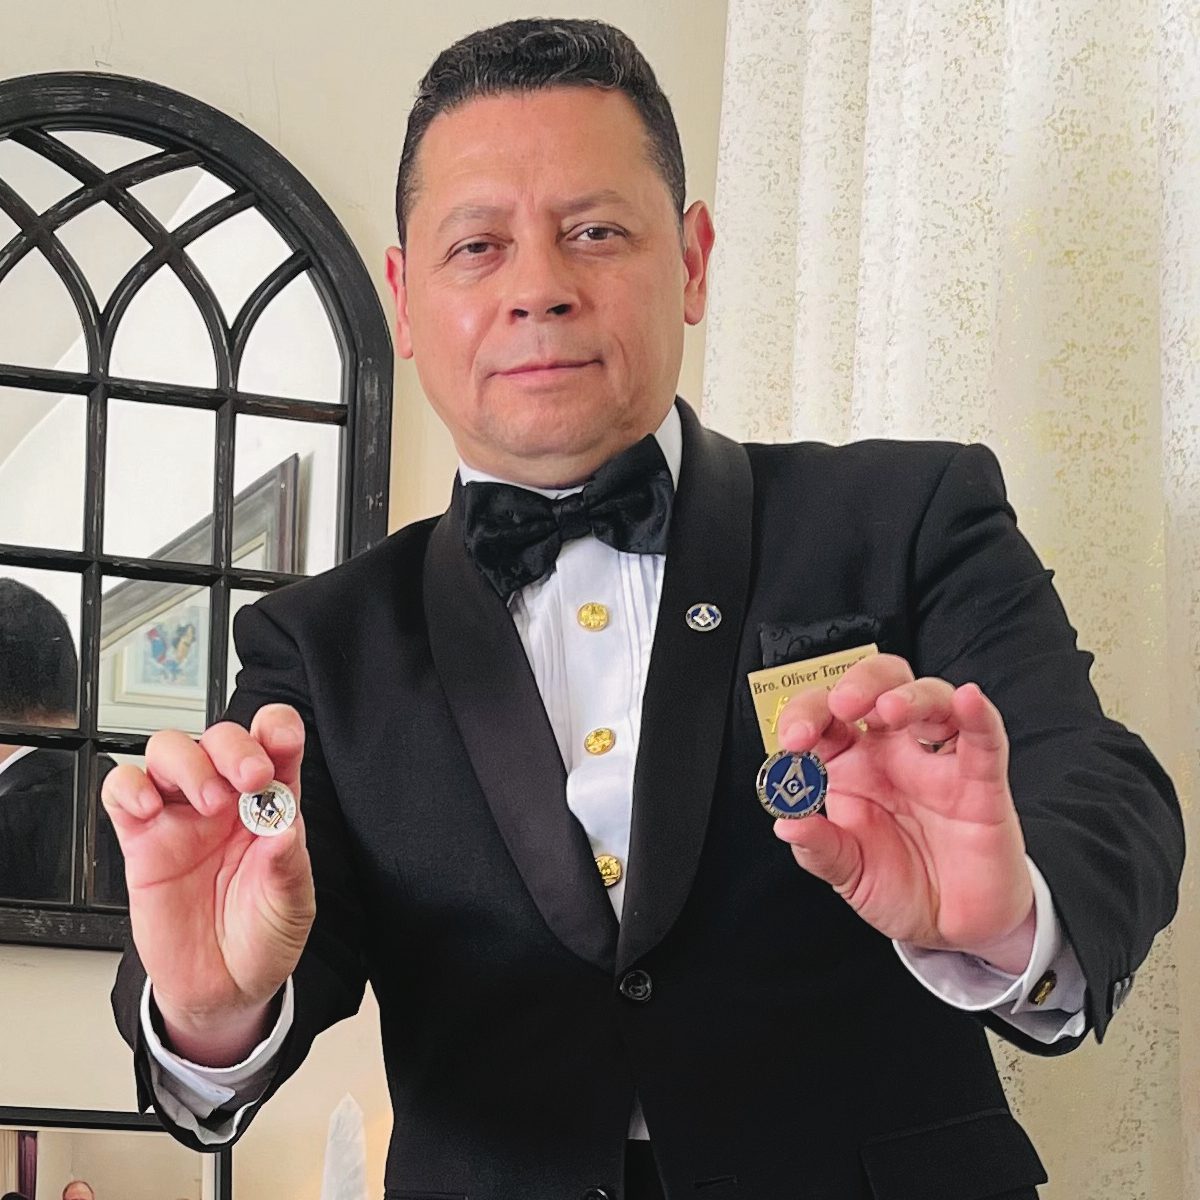 Oliver Torrealba Torres, a California Mason who first joined Masonry in Venezuela. Meet a group of California Masons who also belong to Masonic lodges in their home countries in Central America, South America, and Latin America.